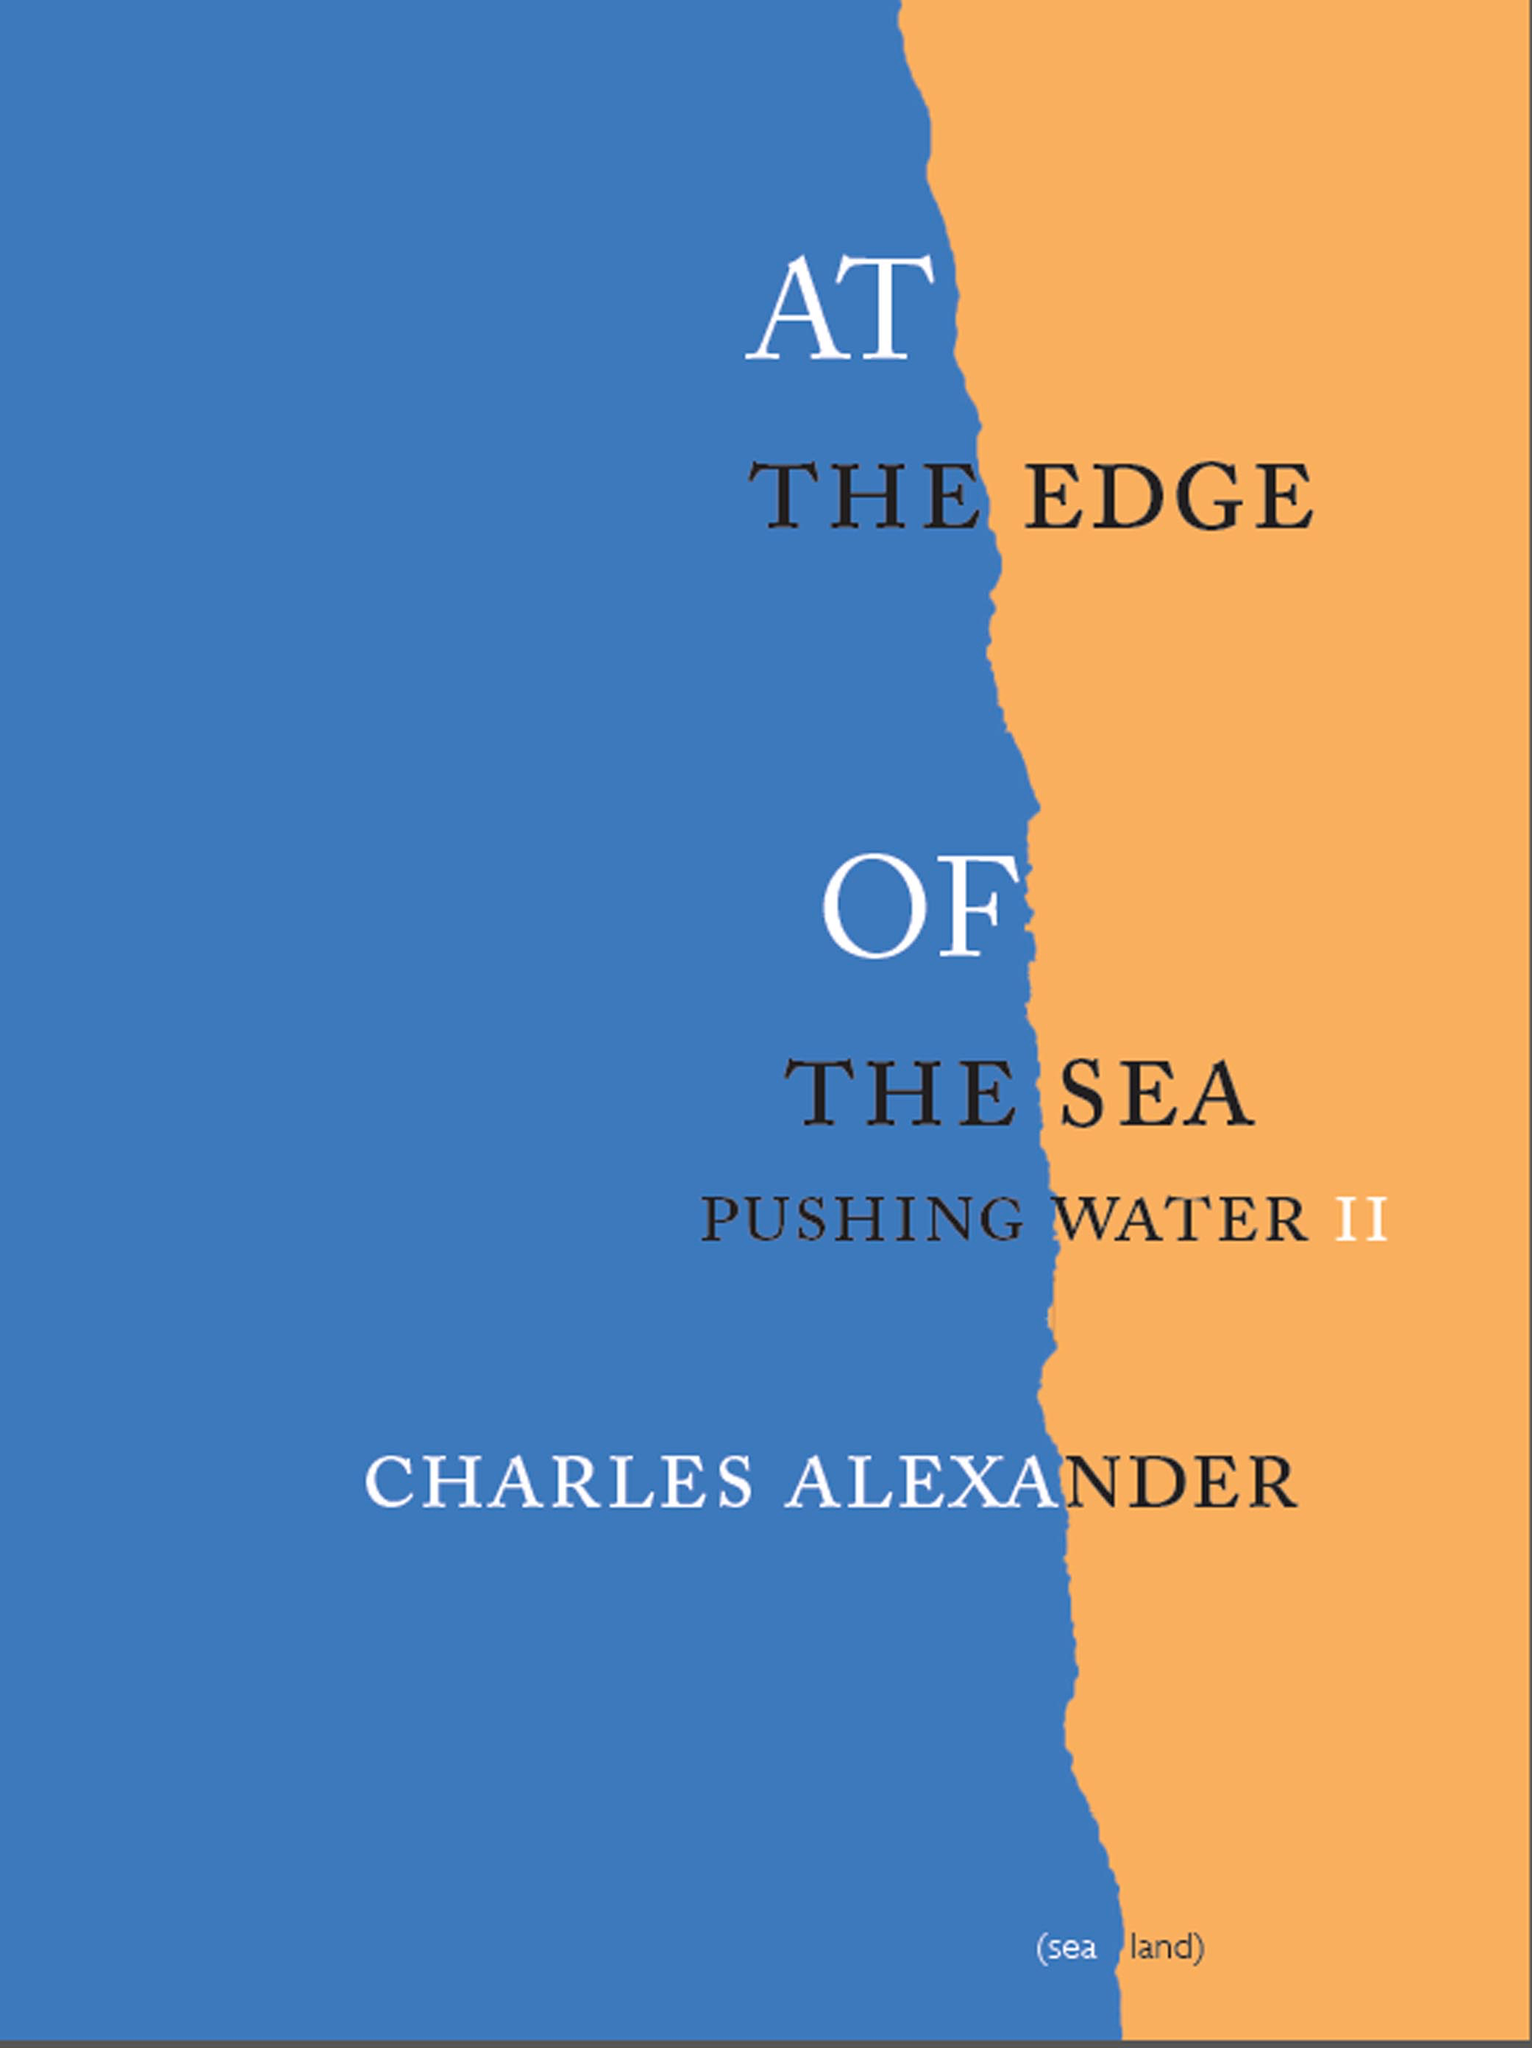 At the Edge of the Sea: Pushing Water II